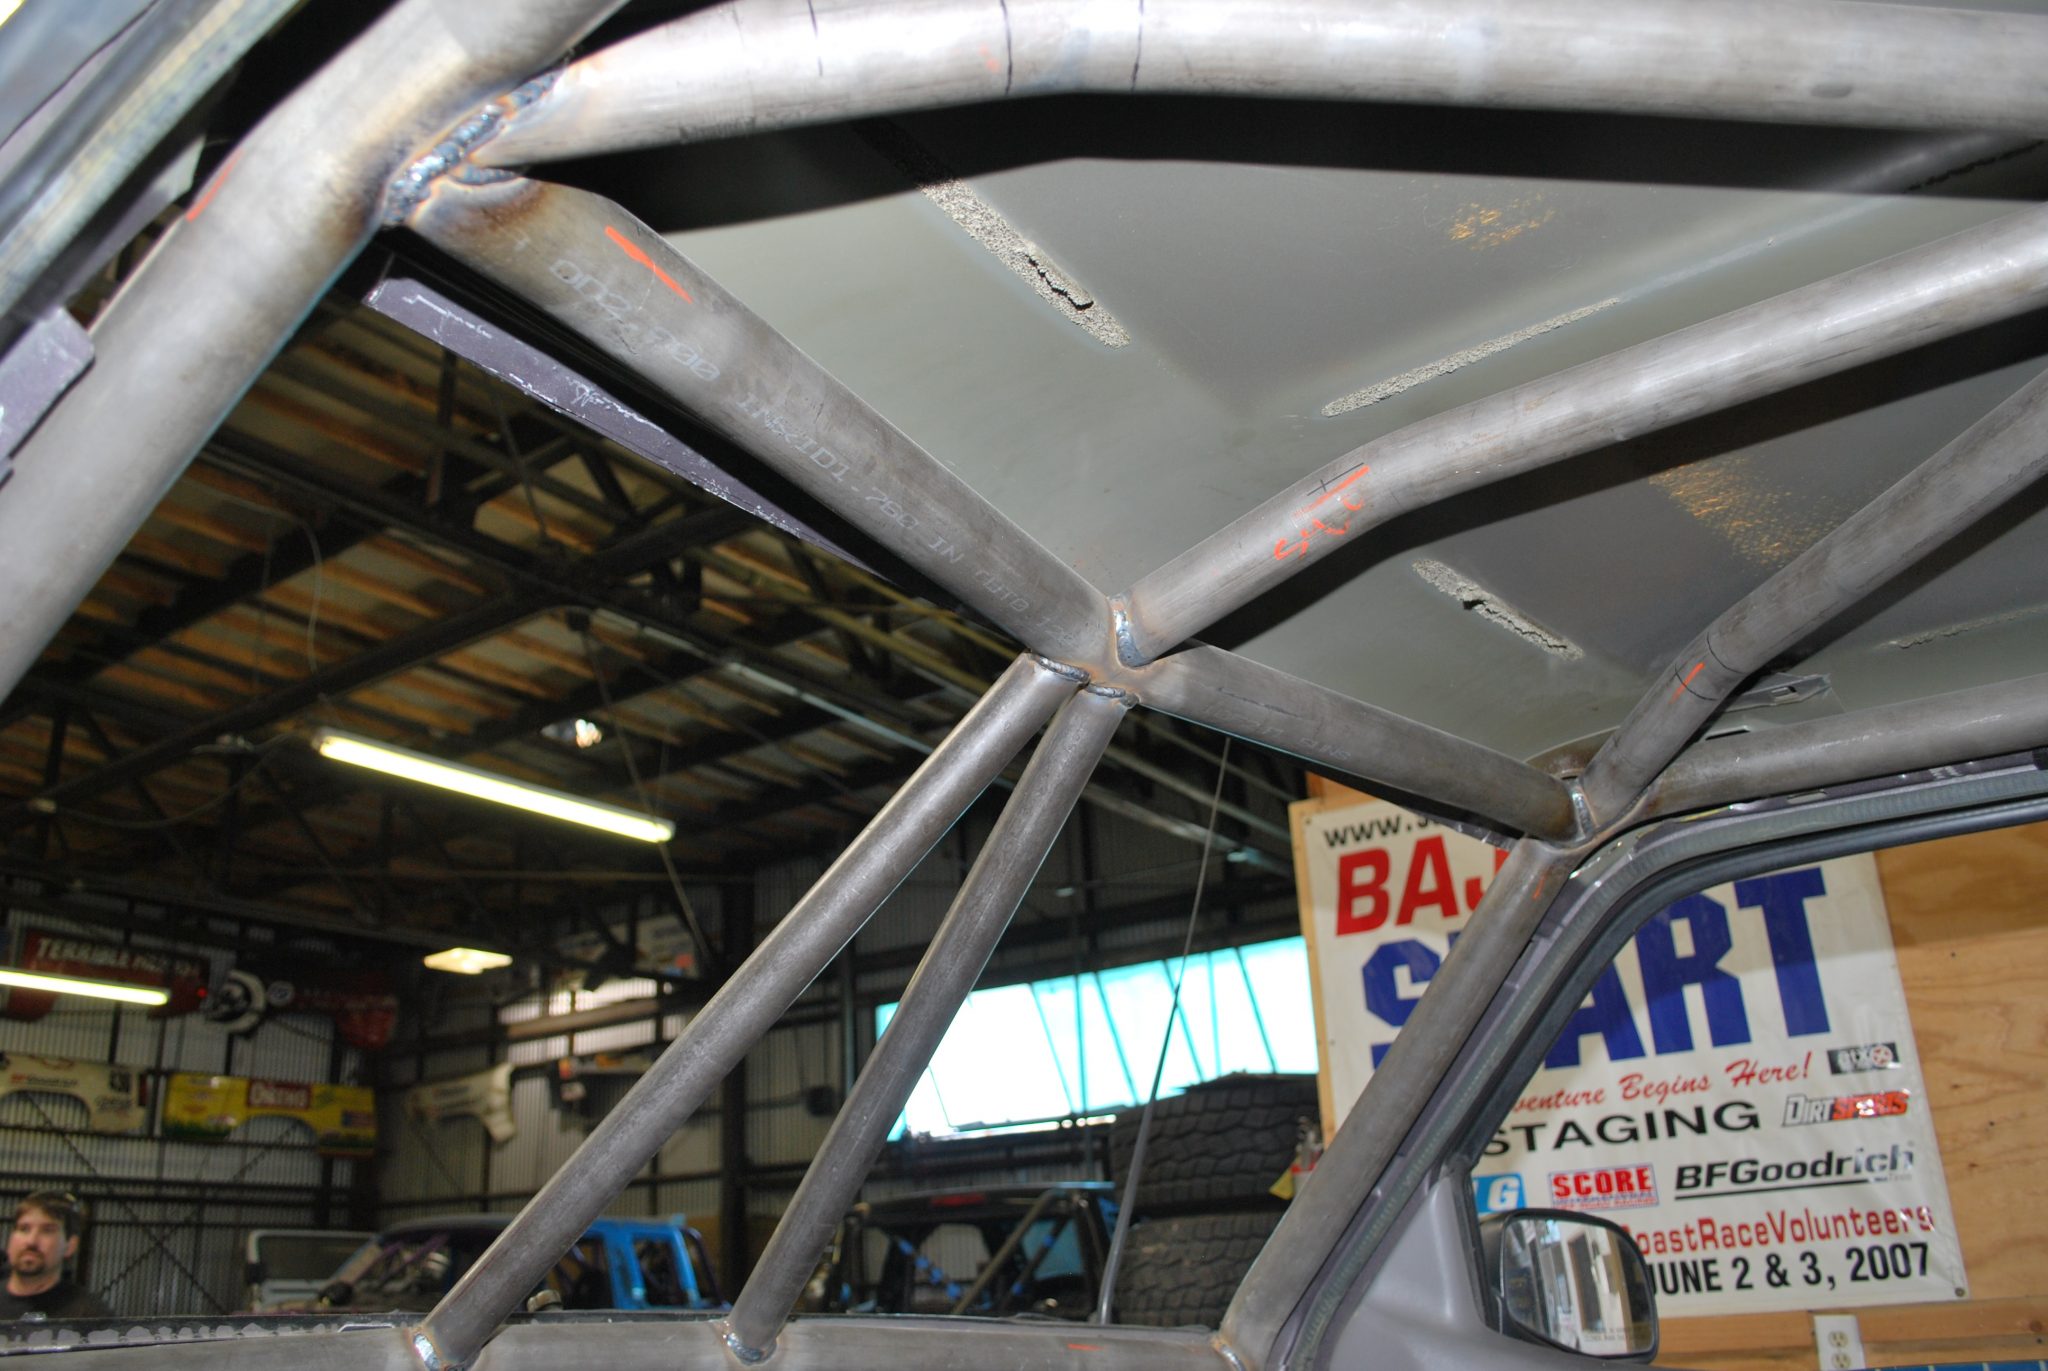 1997 Ford ranger roll cage #4